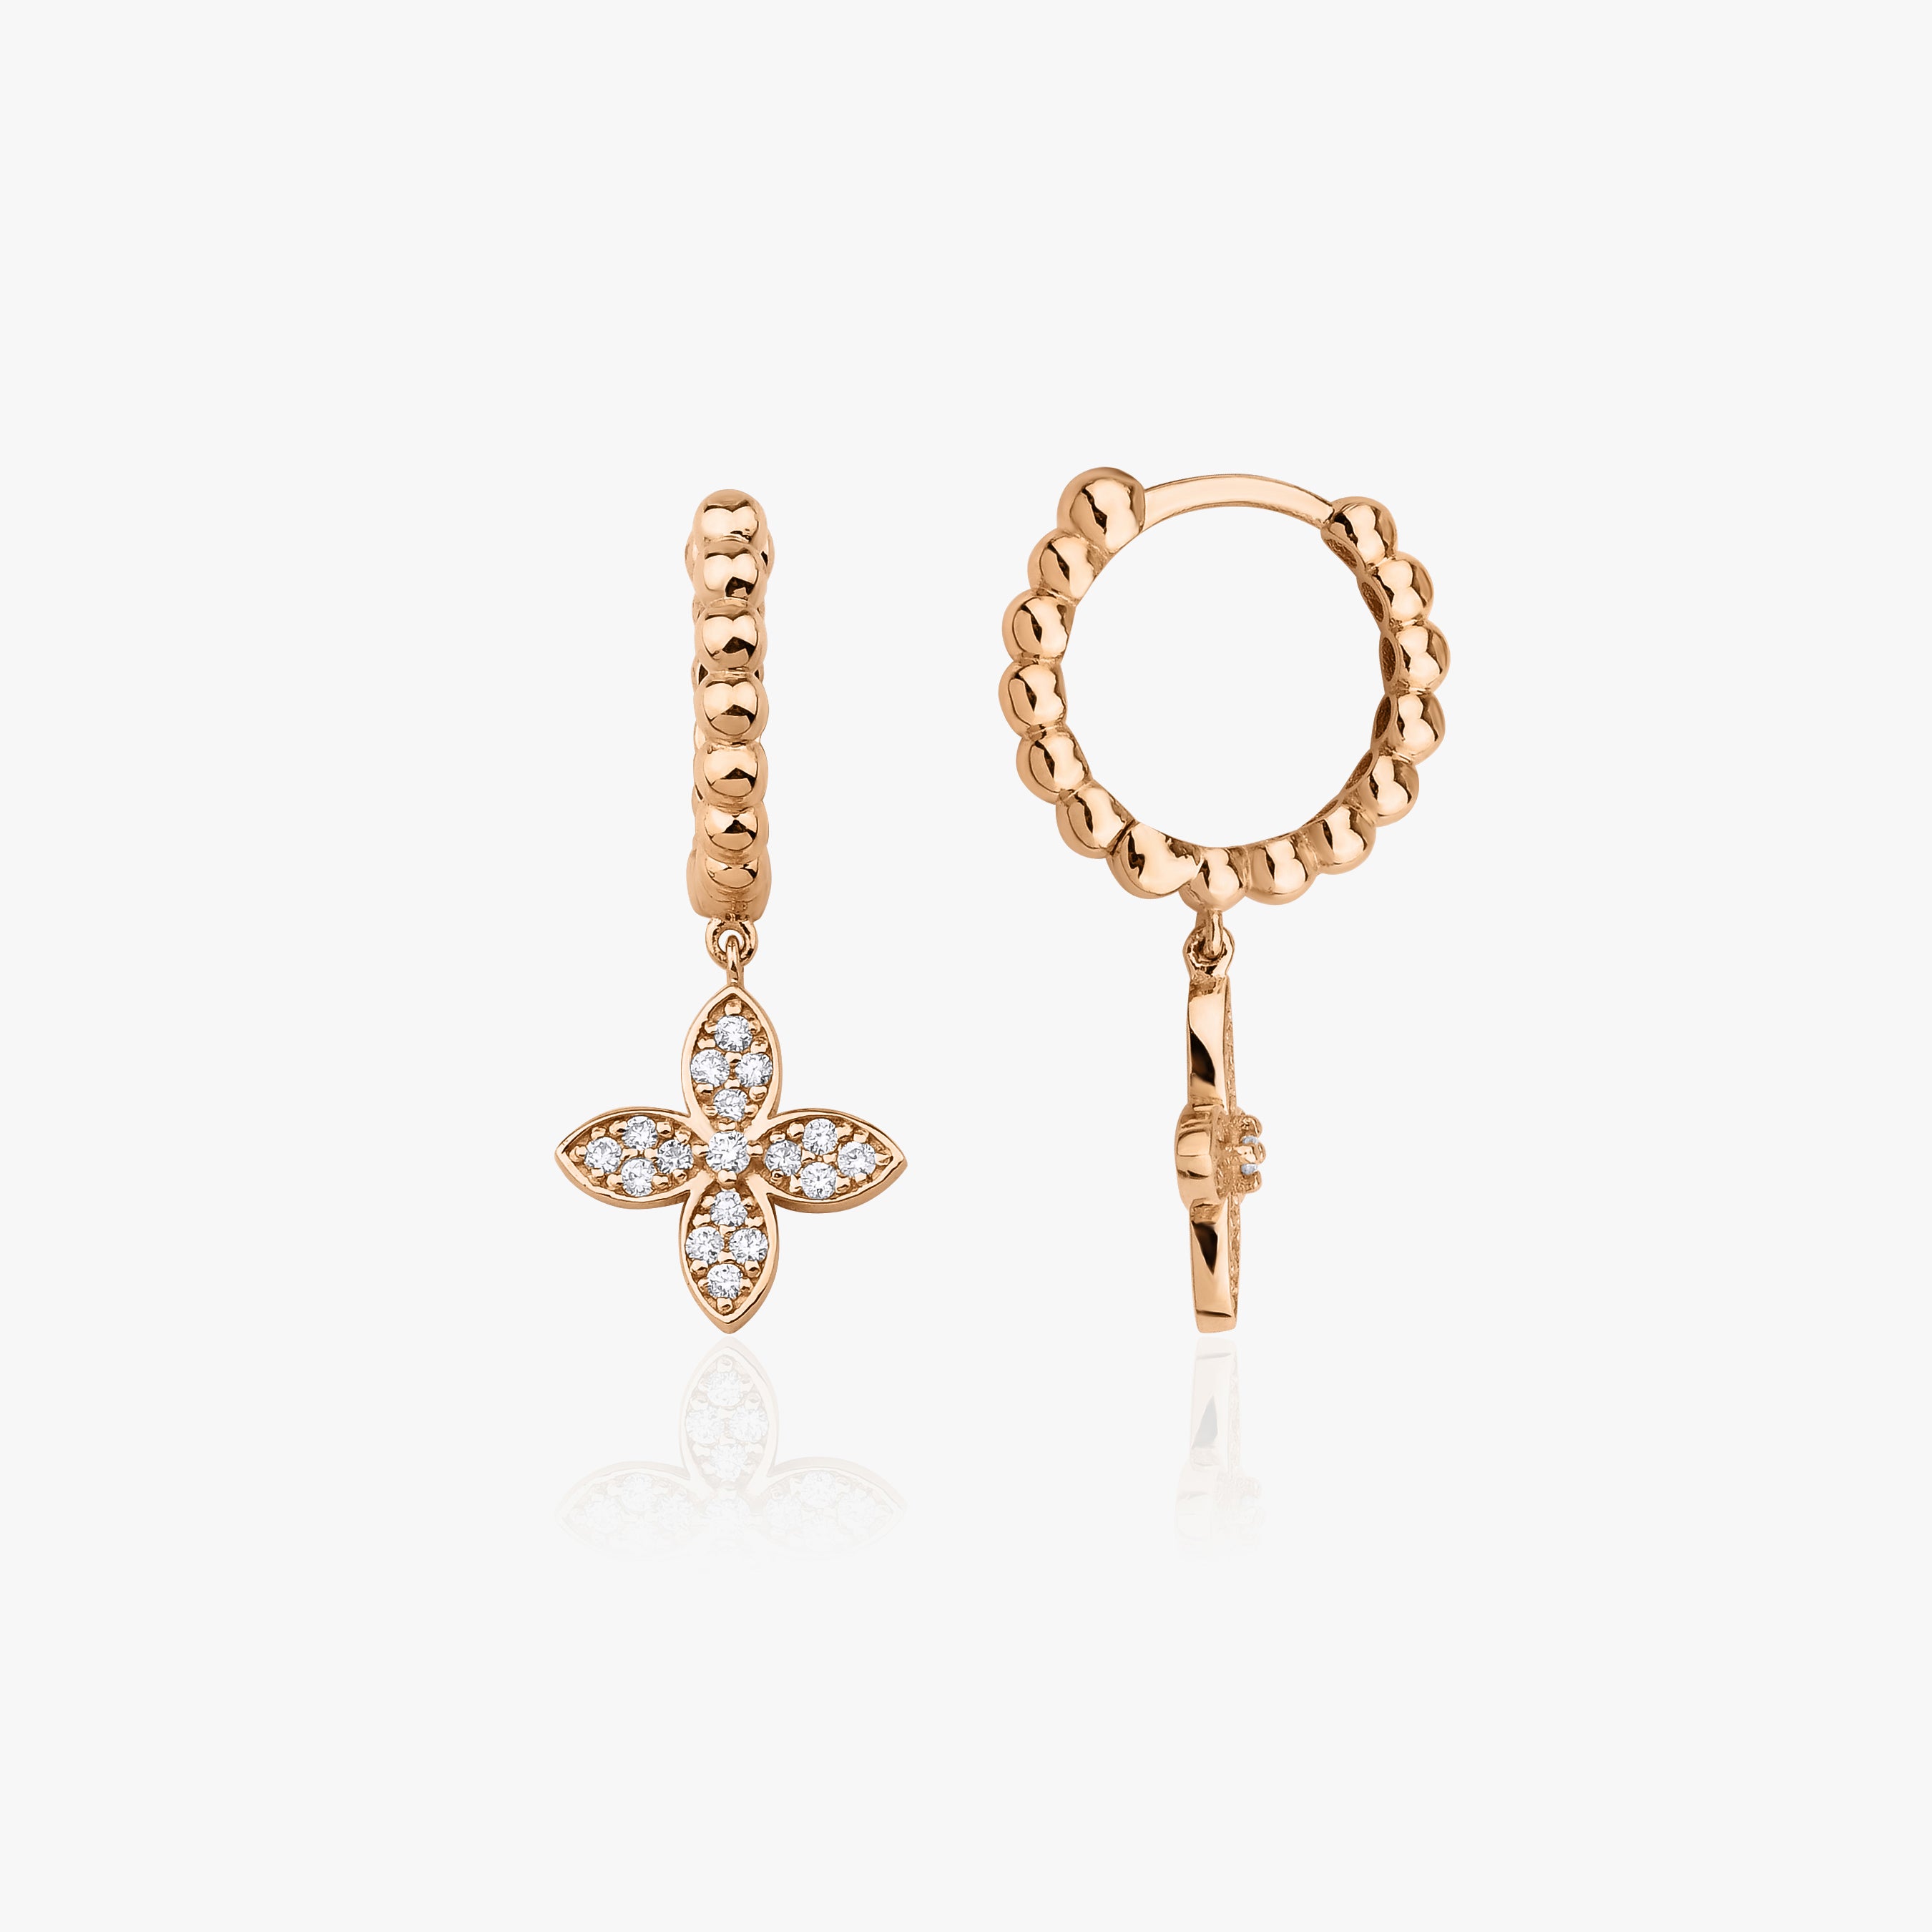 4 Leaf Clover Earrings Available in 14K and 18K Gold